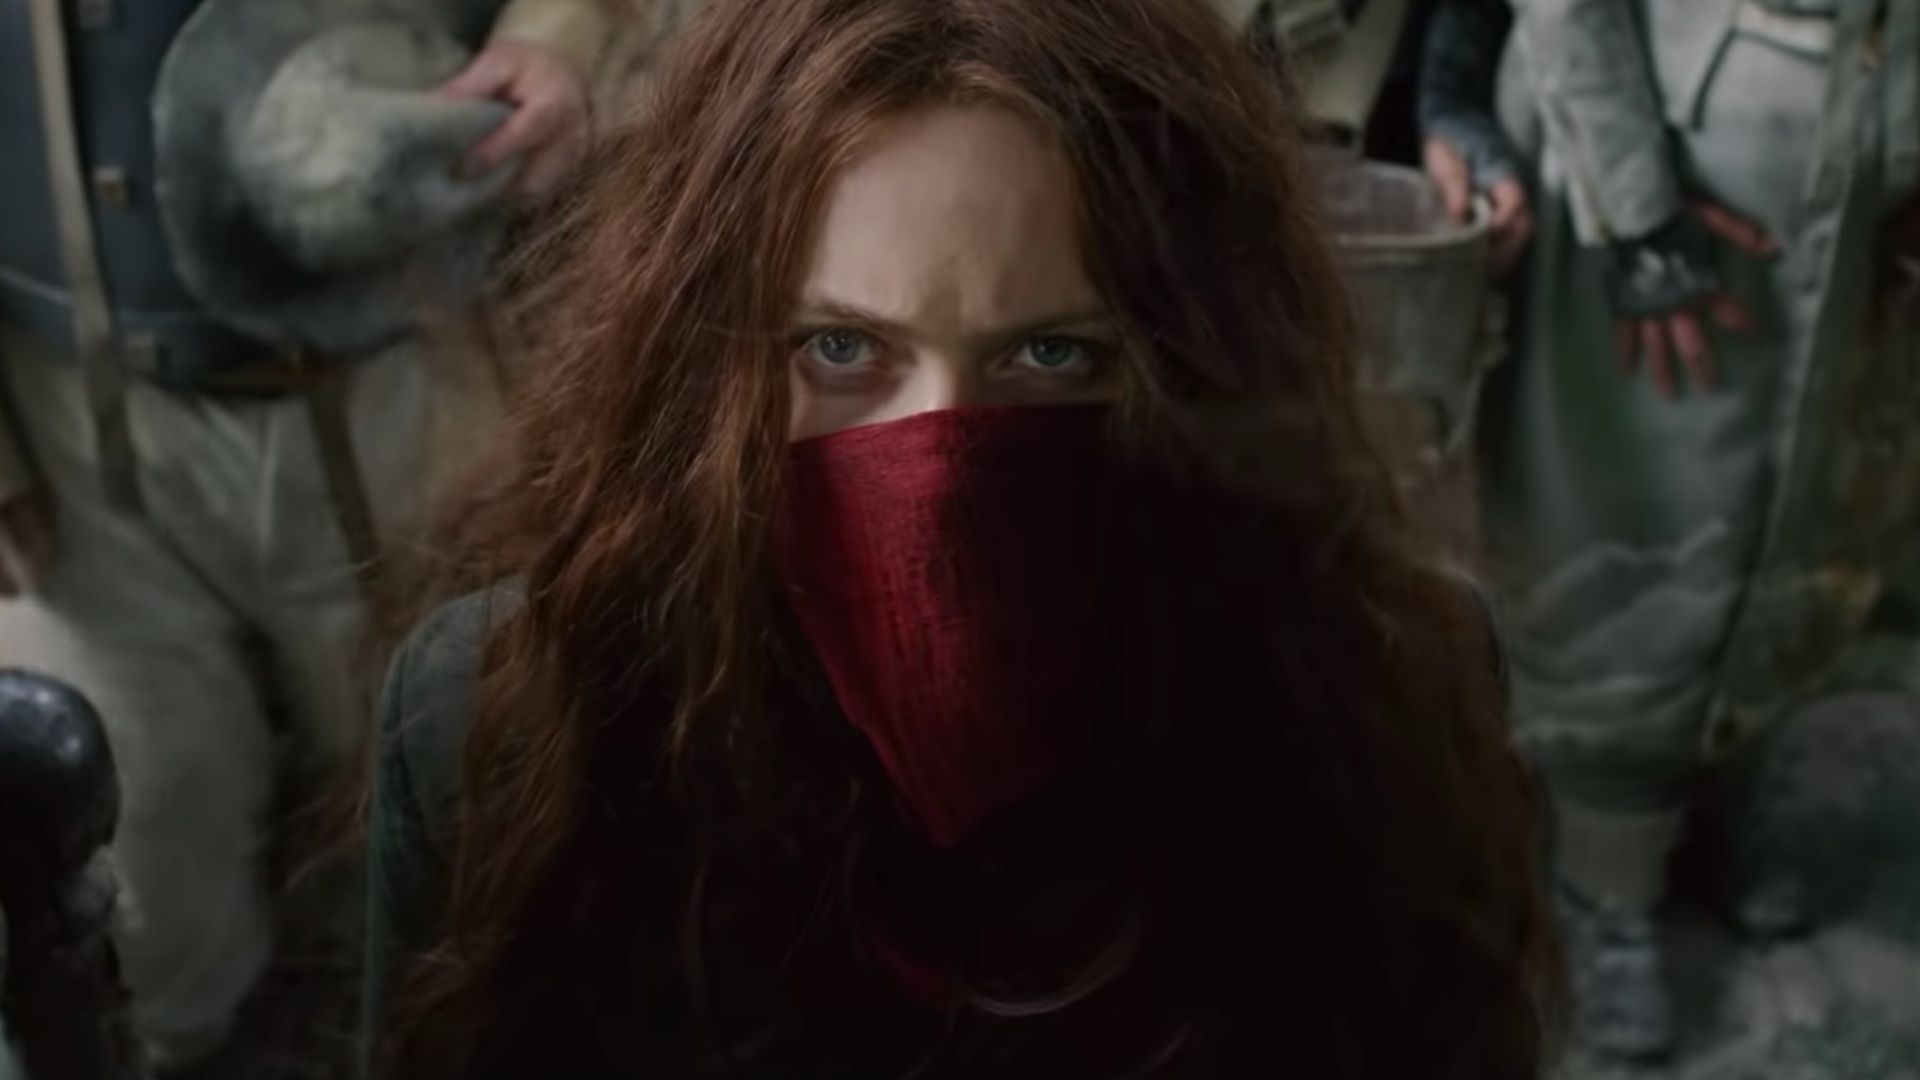 The Mortal Engines Has a Stupid Premise. That Doesn't Mean It's a Stupid Movie